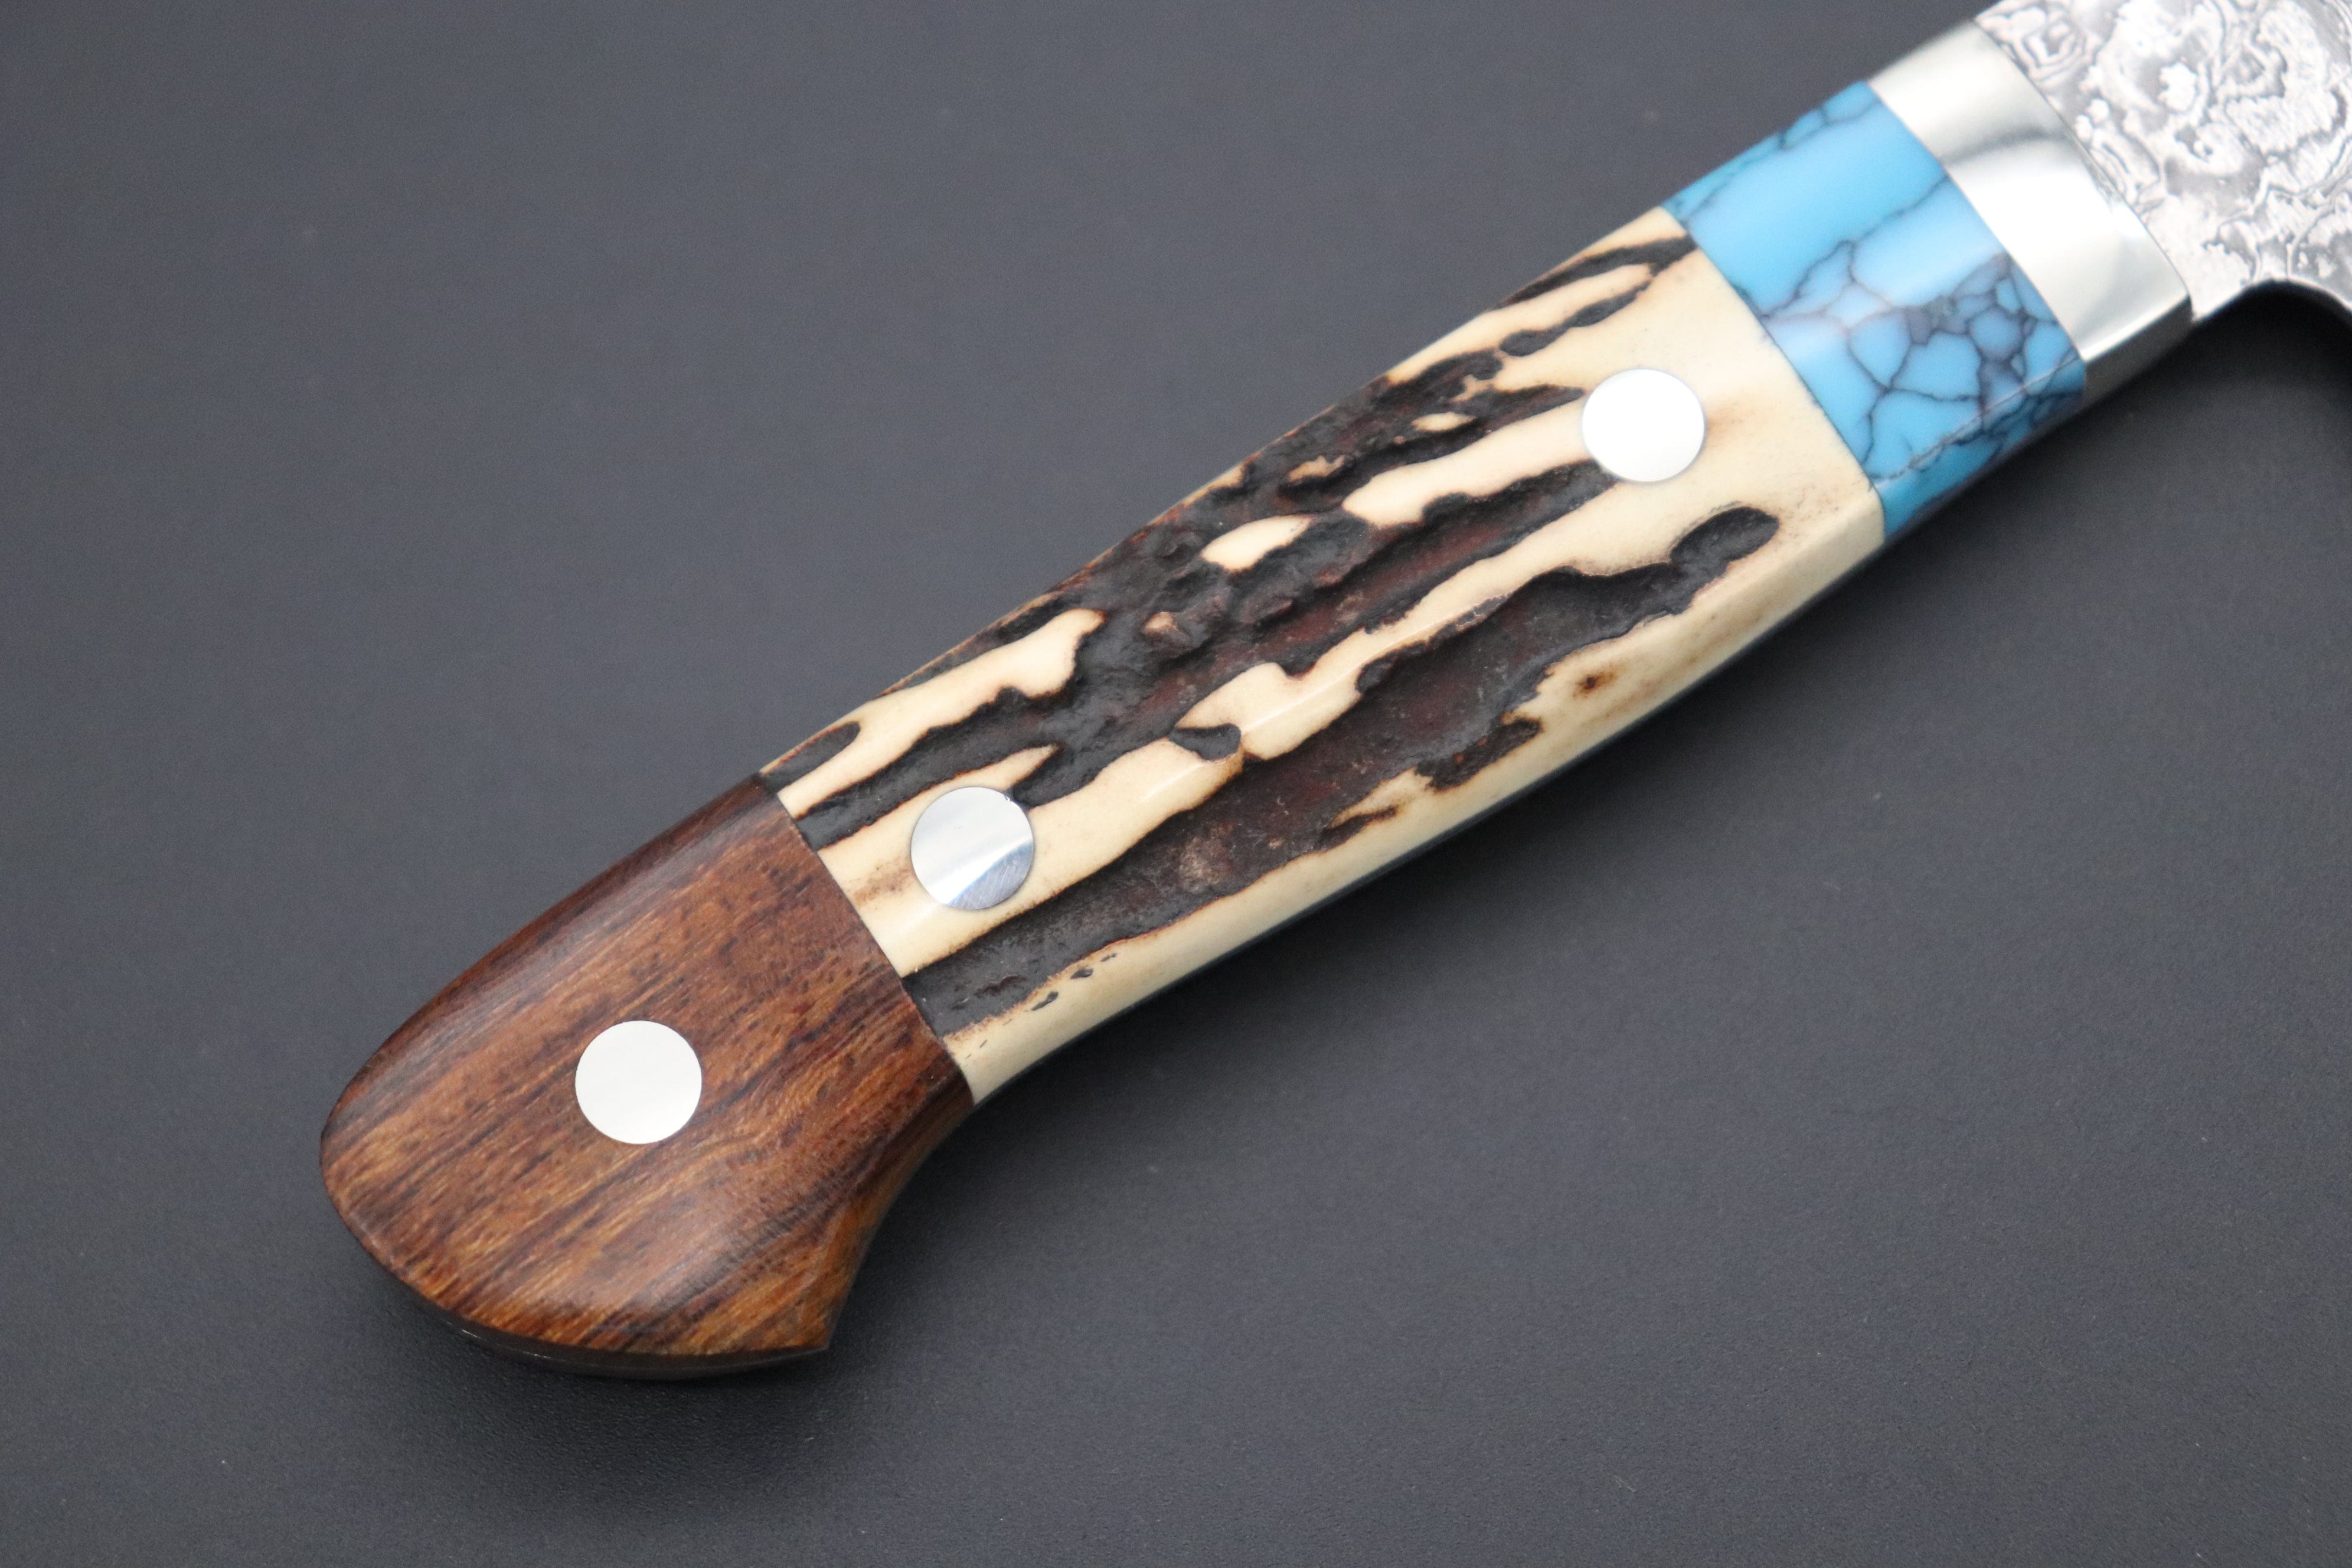 https://japanesechefsknife.com/cdn/shop/products/mr-itou-gyuto-mr-itou-treasure-hunter-series-r-2-custom-damascus-gyuto-190mm-7-4-inch-custom-combination-handle-turquoise-gem-composite-stone-stag-ironwood-it-114-30648269275233.jpg?v=1668657839